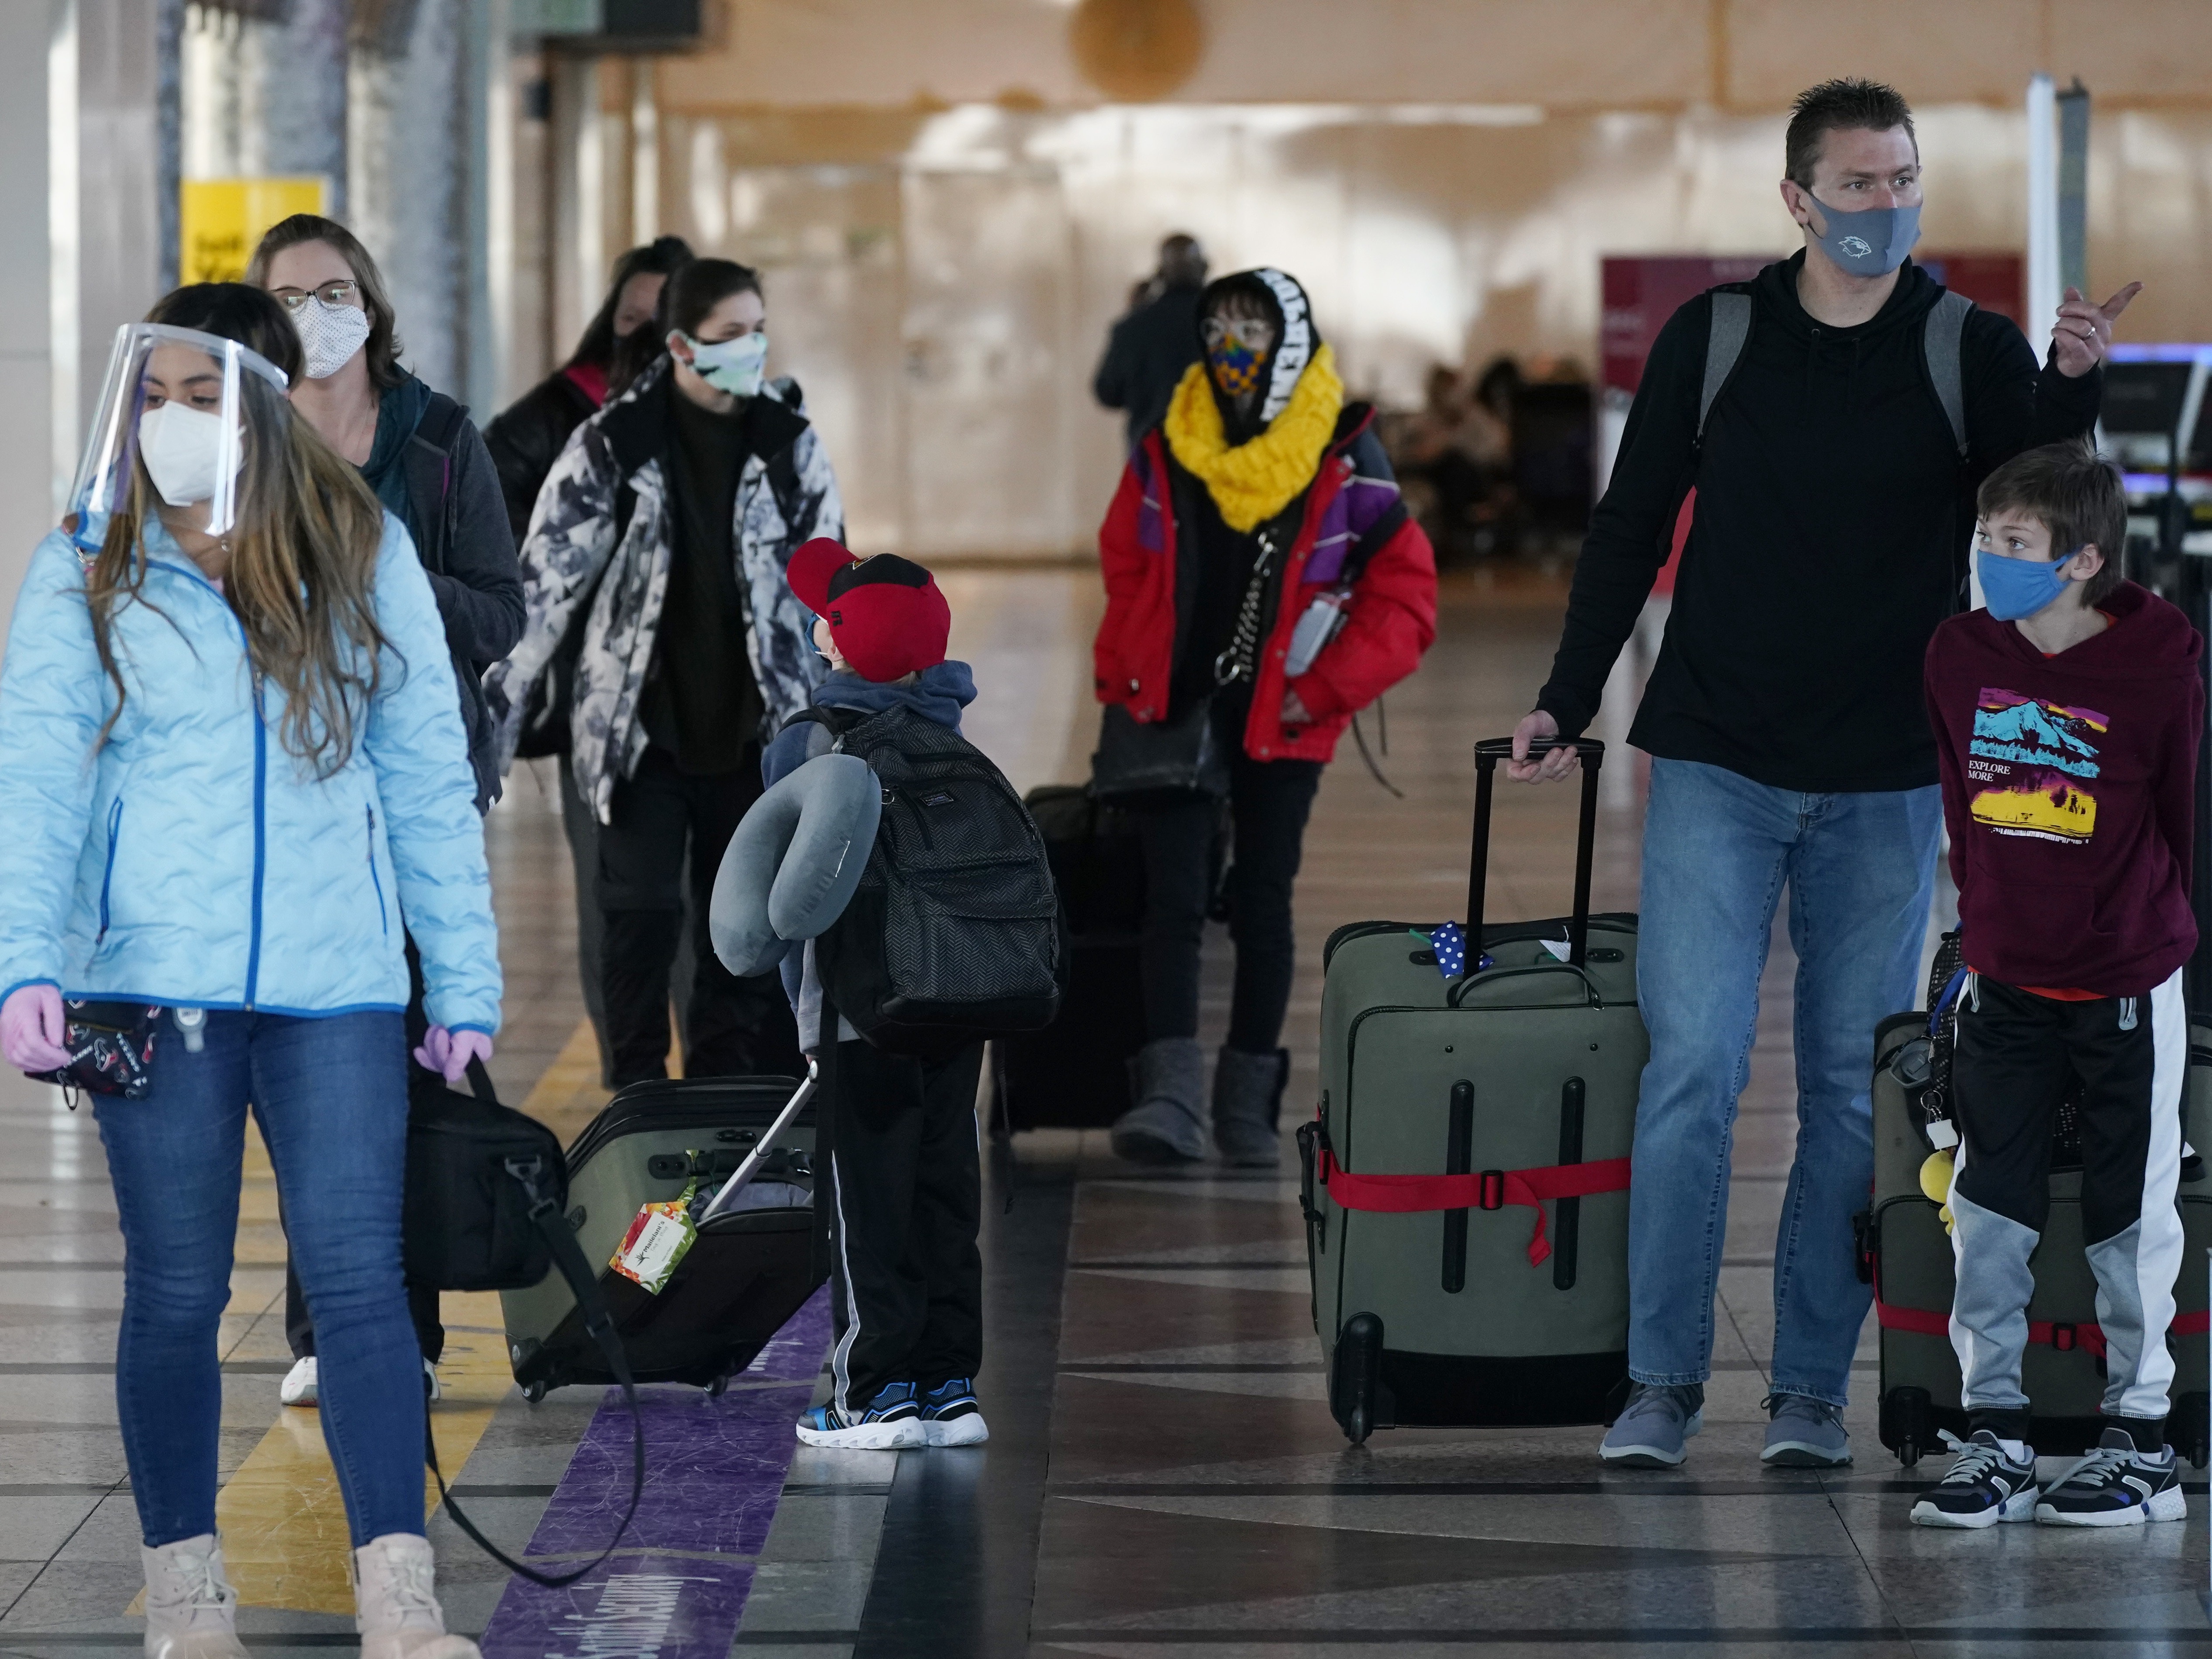 Travelers wear face masks in the main terminal of Denver International Airport on Dec. 31, 2020. Starting Feb. 1, travelers will be required to wear face masks on nearly all forms of public transportation. CREDIT: David Zalubowski/AP